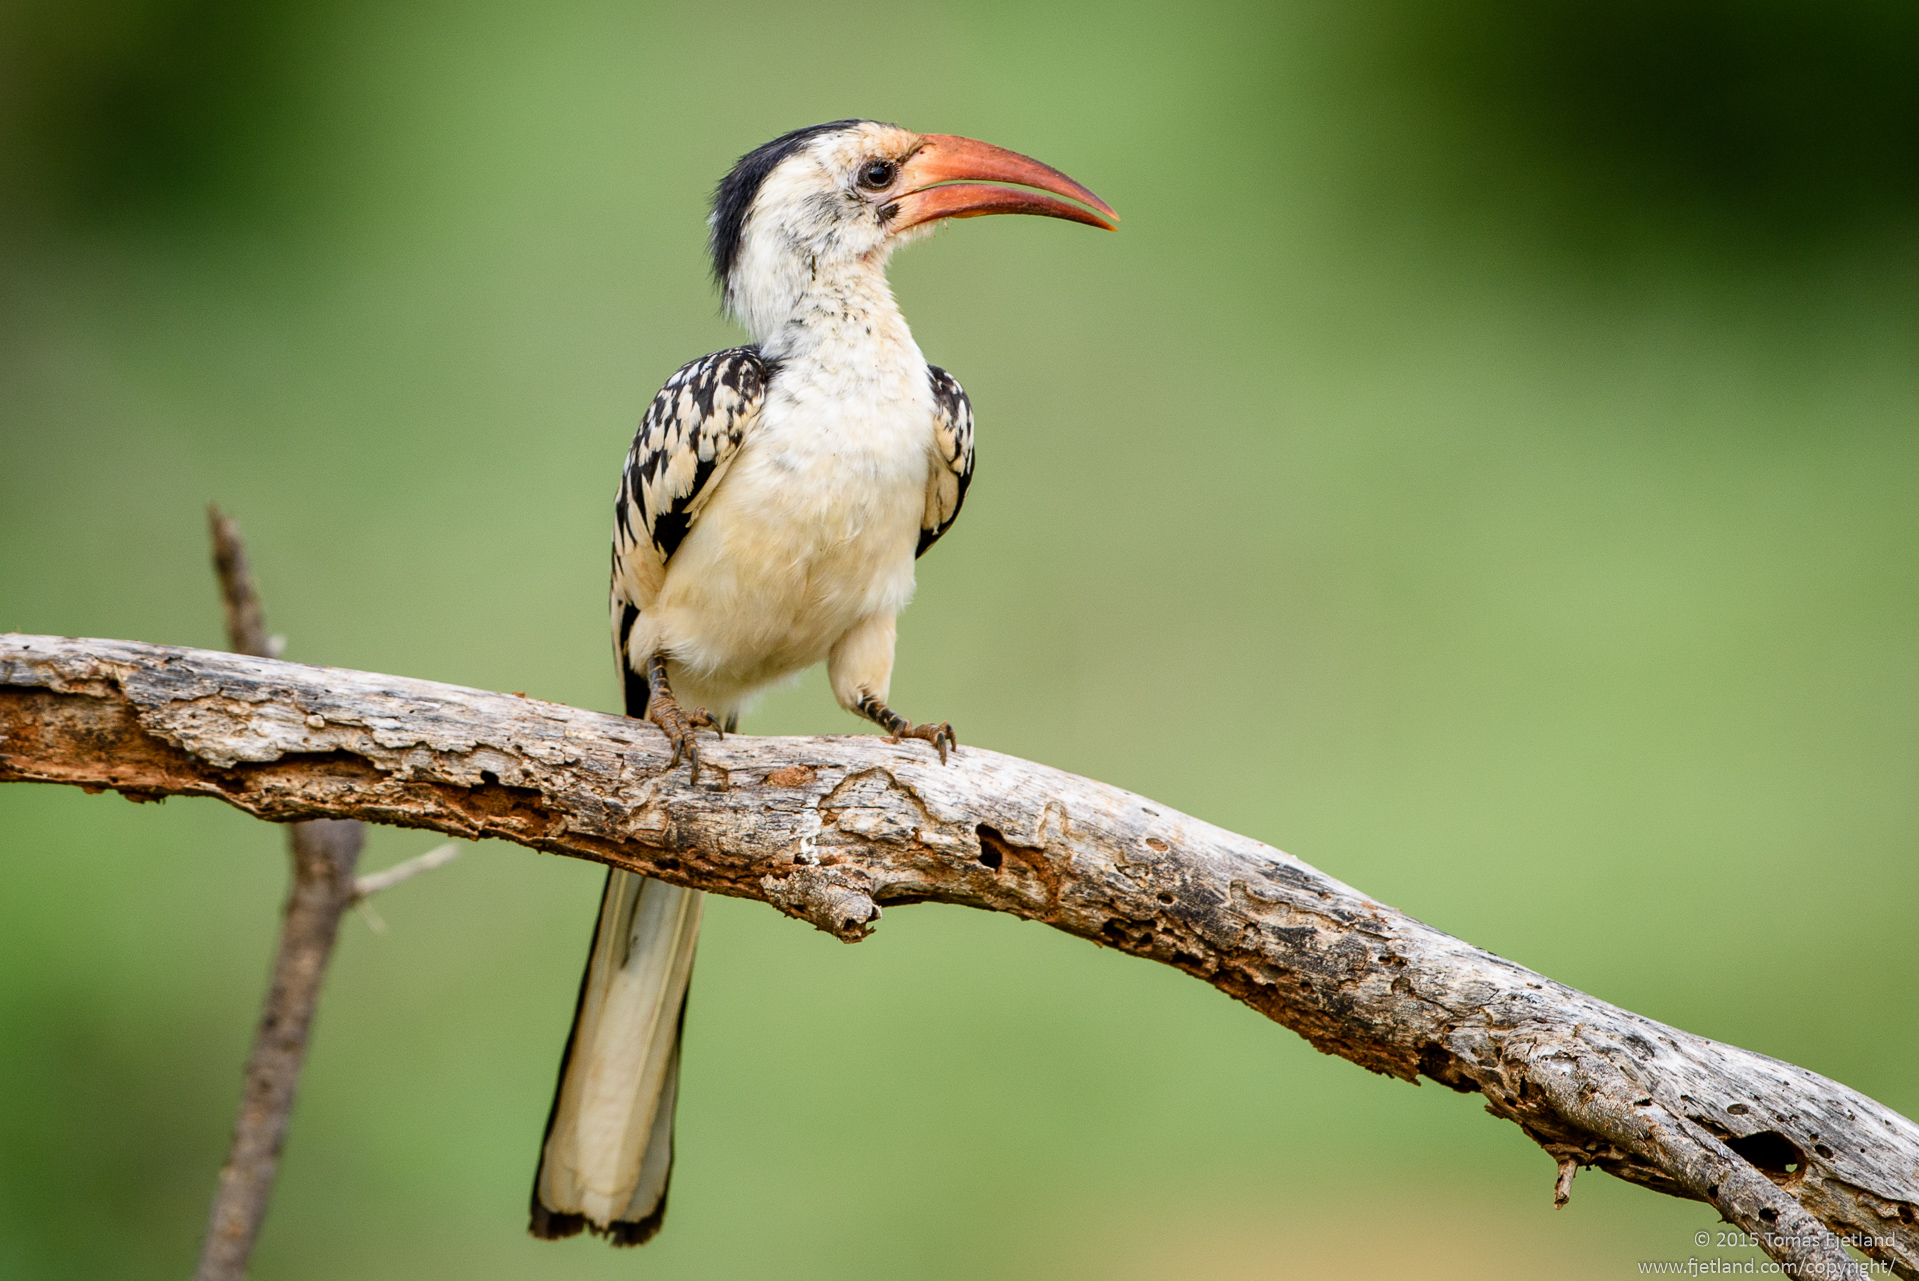 This red-billed hornbill was trying to impress a female by showing her how much mud he could fit in his beak. Males use mud to seal the female inside hollow trees where she looks after the eggs